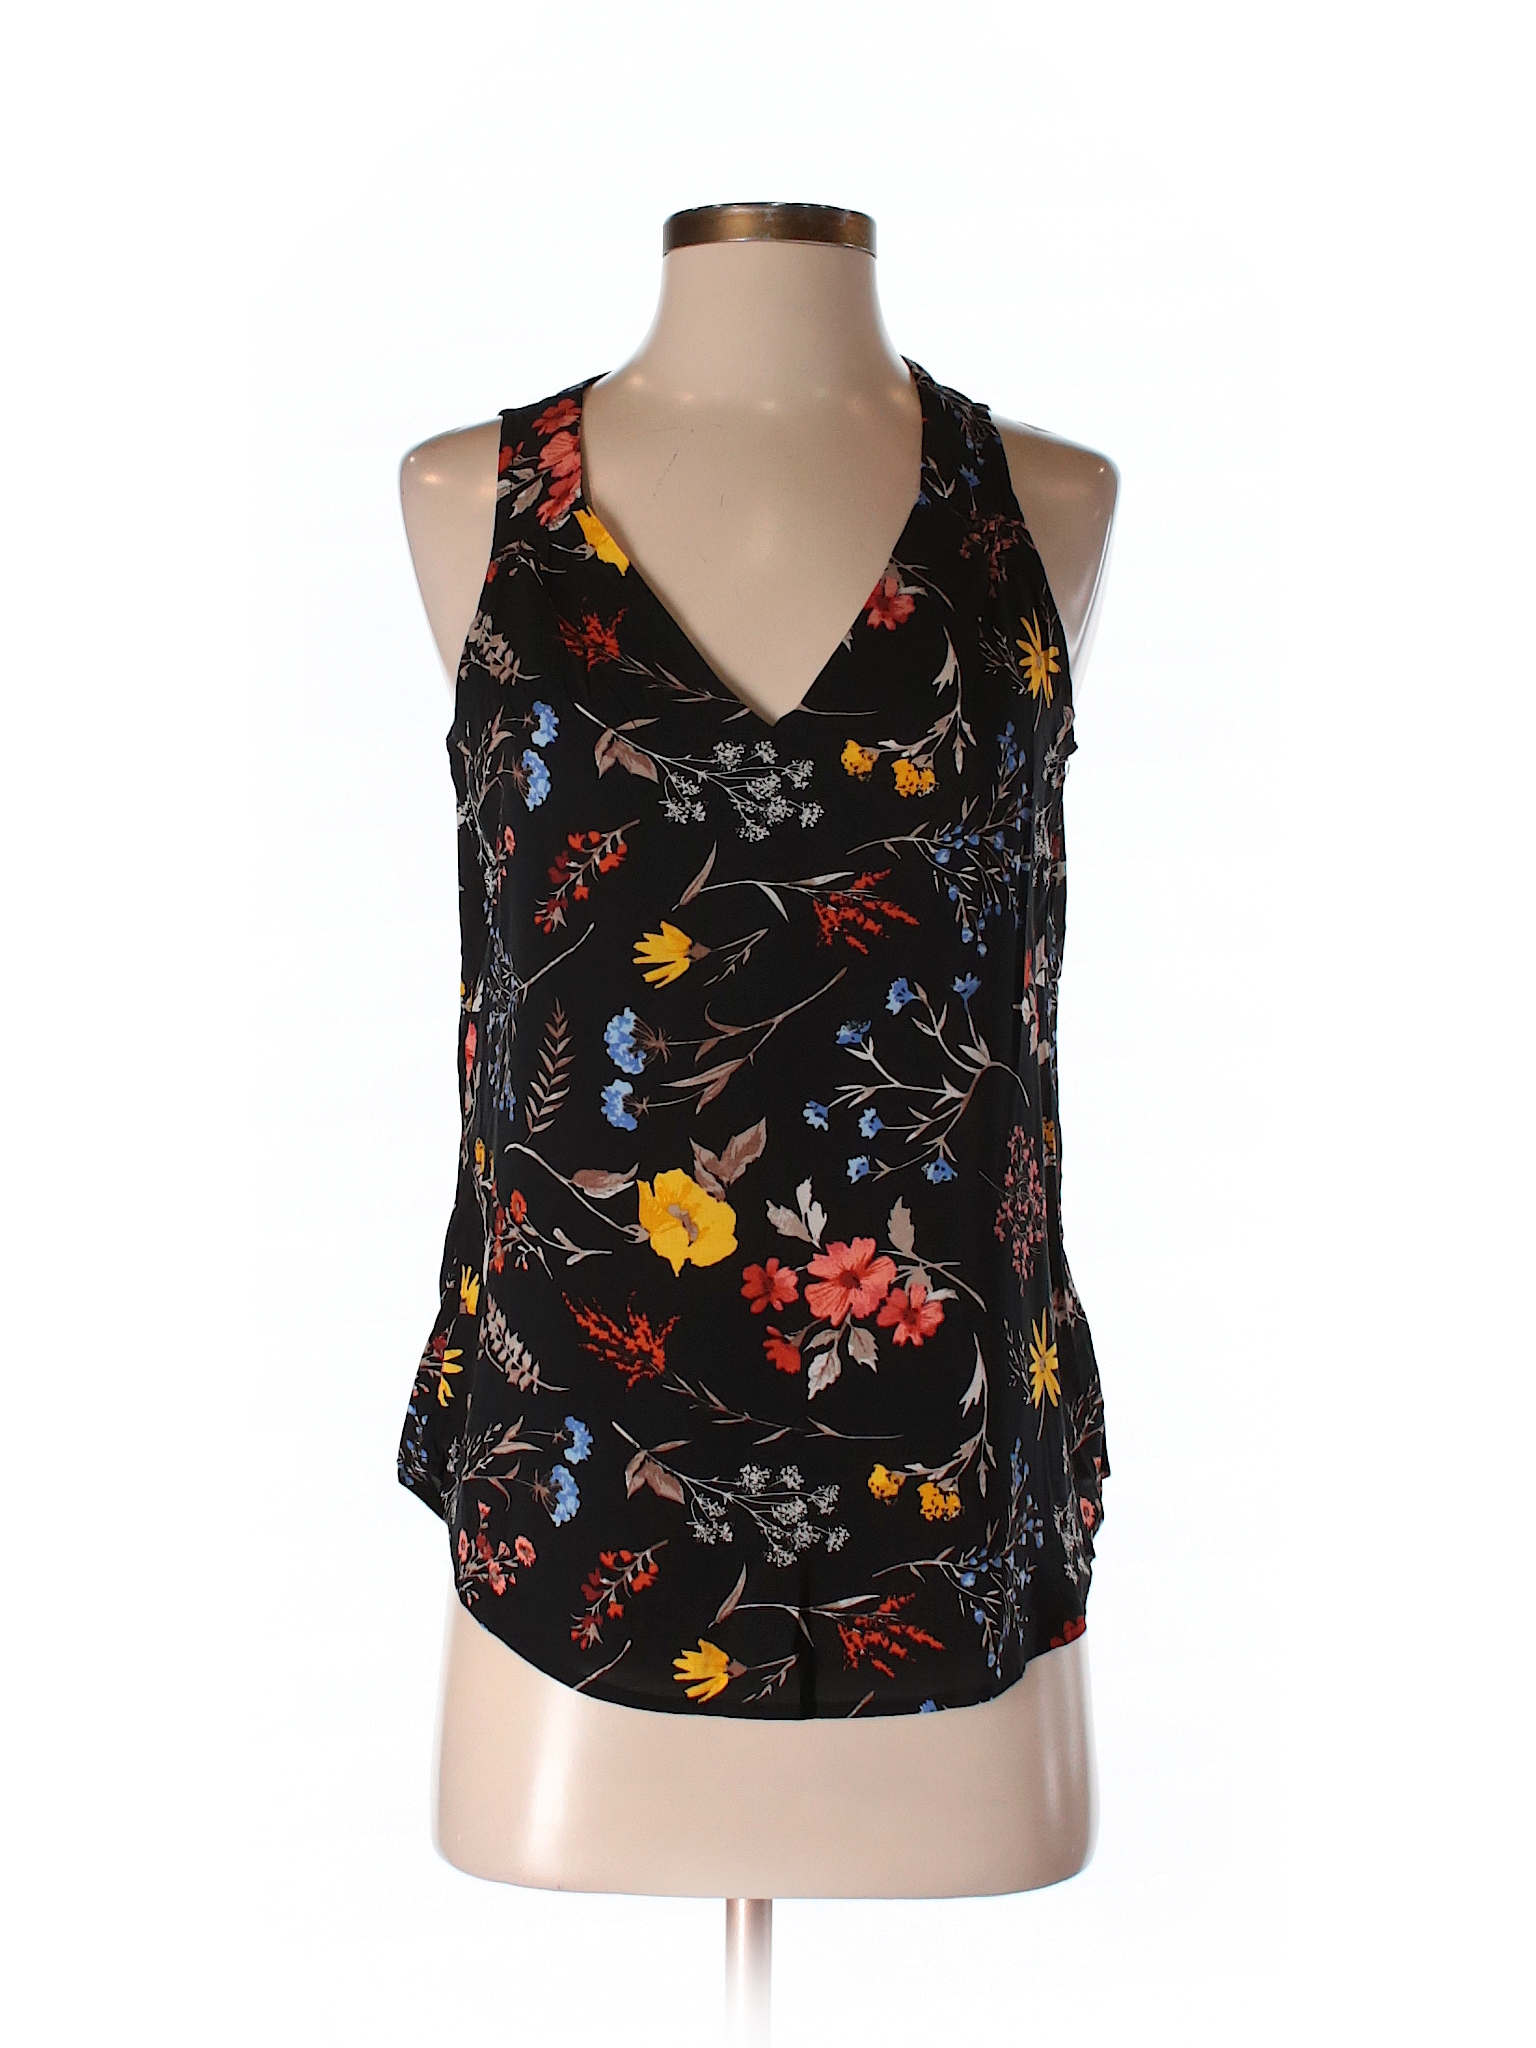 Old Navy 100% Rayon Print Black Sleeveless Blouse Size S - 68% off ...